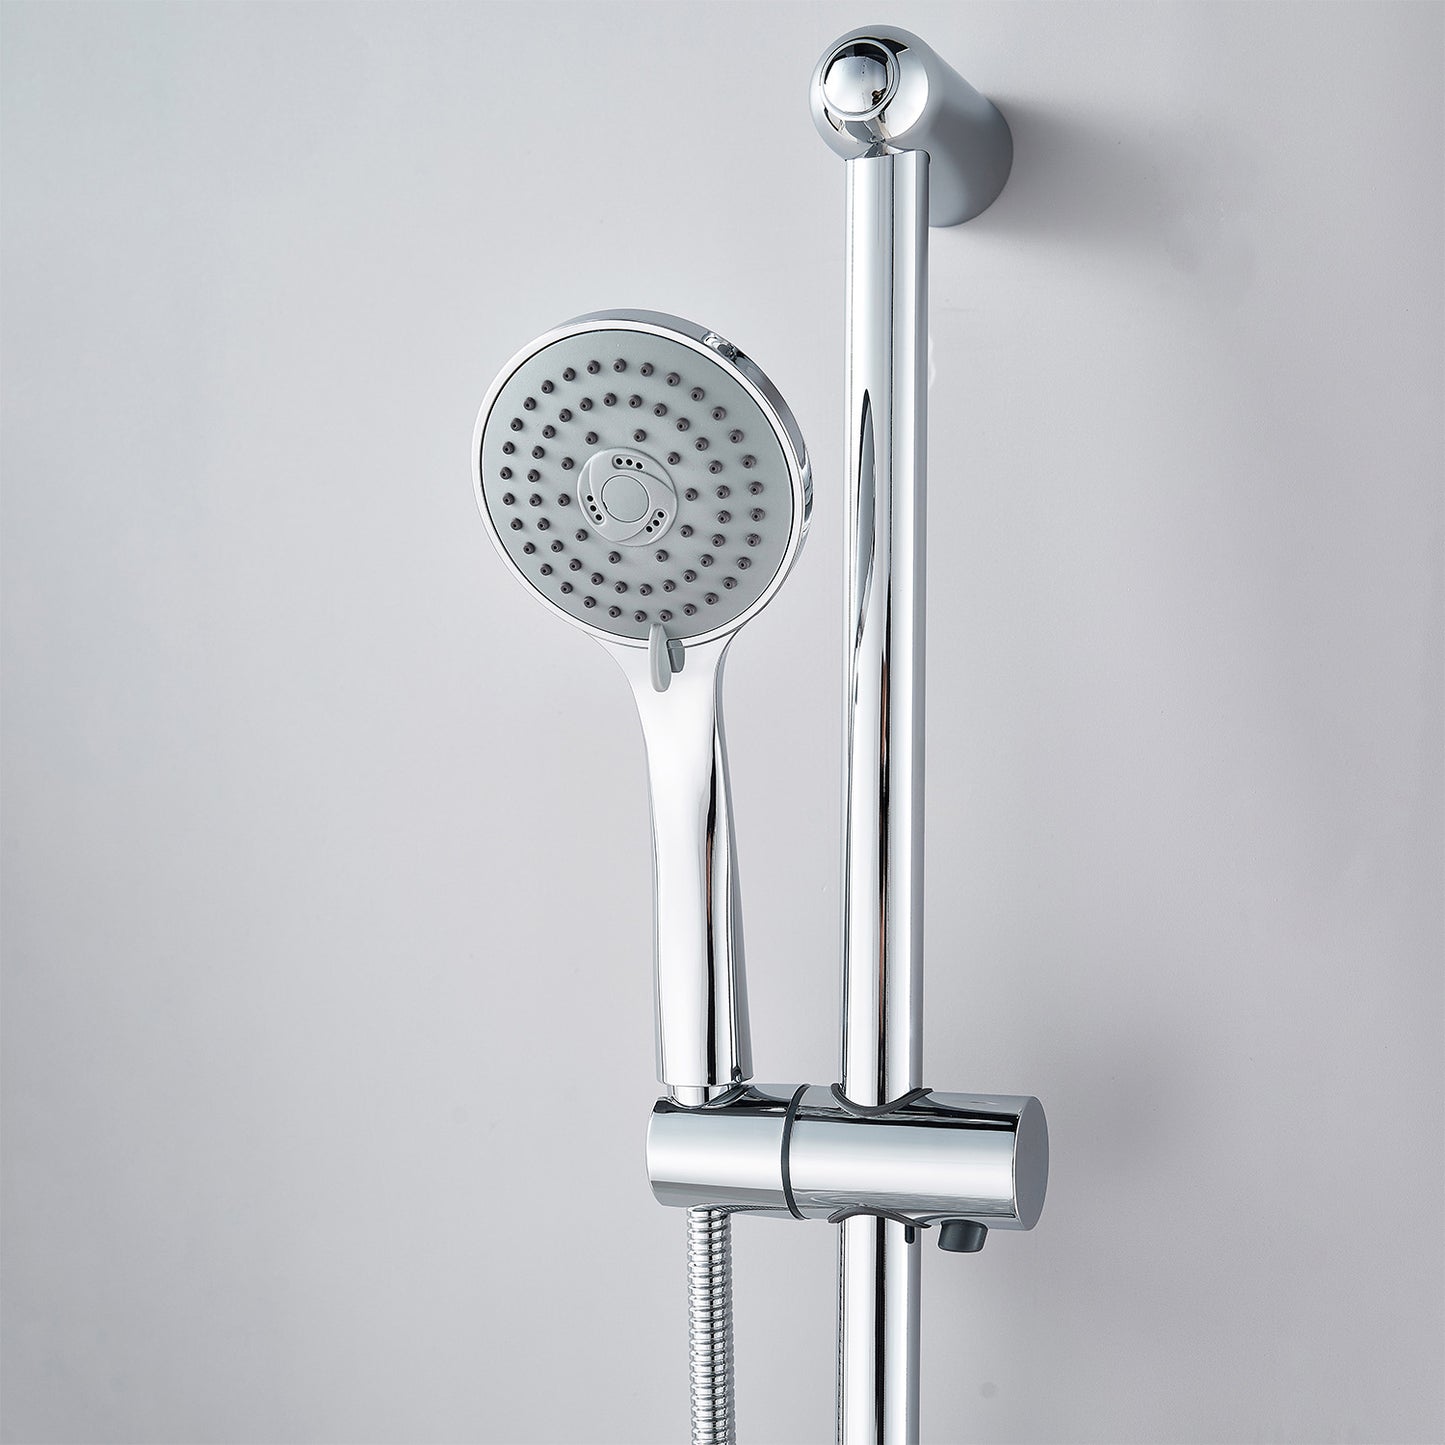 AICA single shower with basket